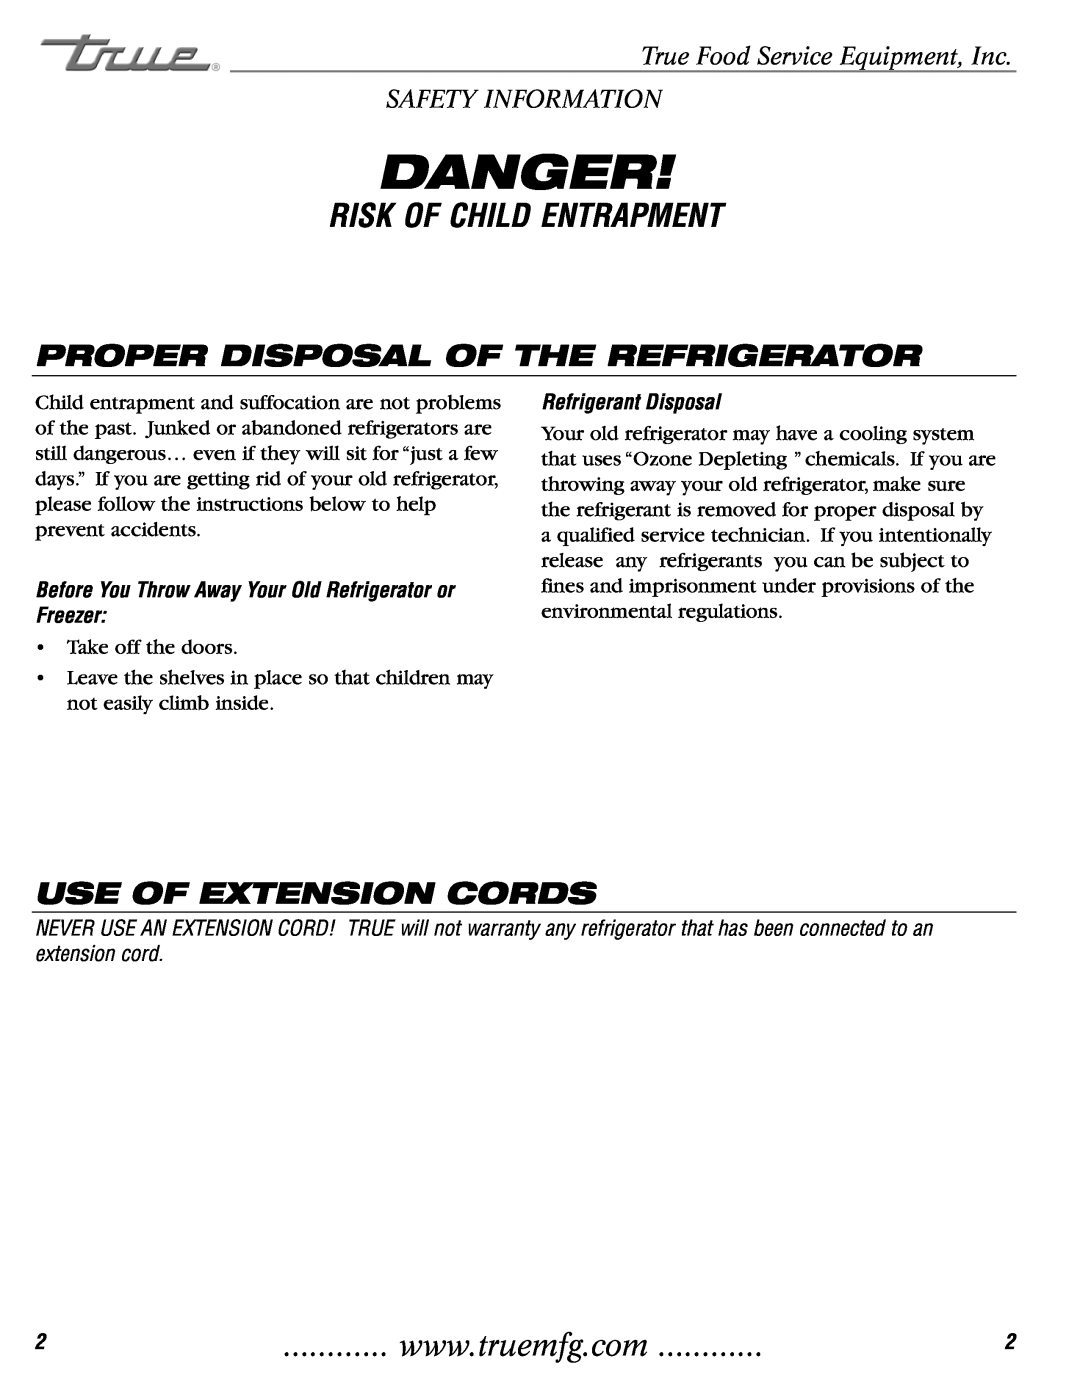 True Manufacturing Company TDB-24-48-1-G-1, TDD-4 Proper Disposal Of The Refrigerator, Use Of Extension Cords, Danger 